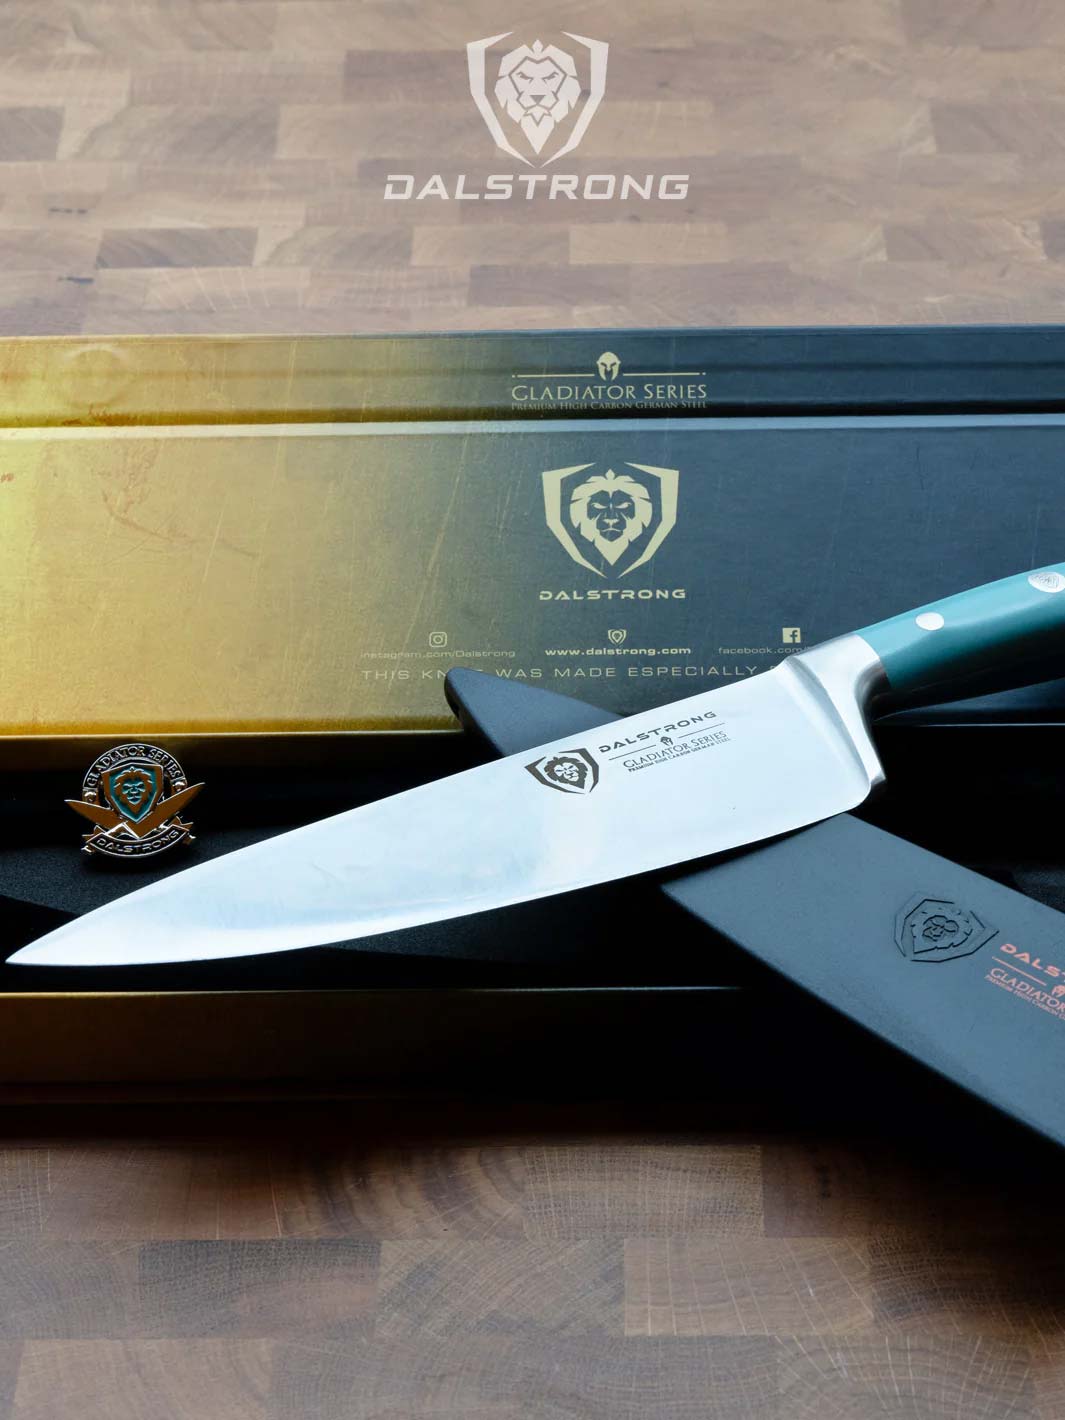 Dalstrong gladiator series 8 inch chef knife with aegeal teal handle and black sheath on top of it's premium packaging.